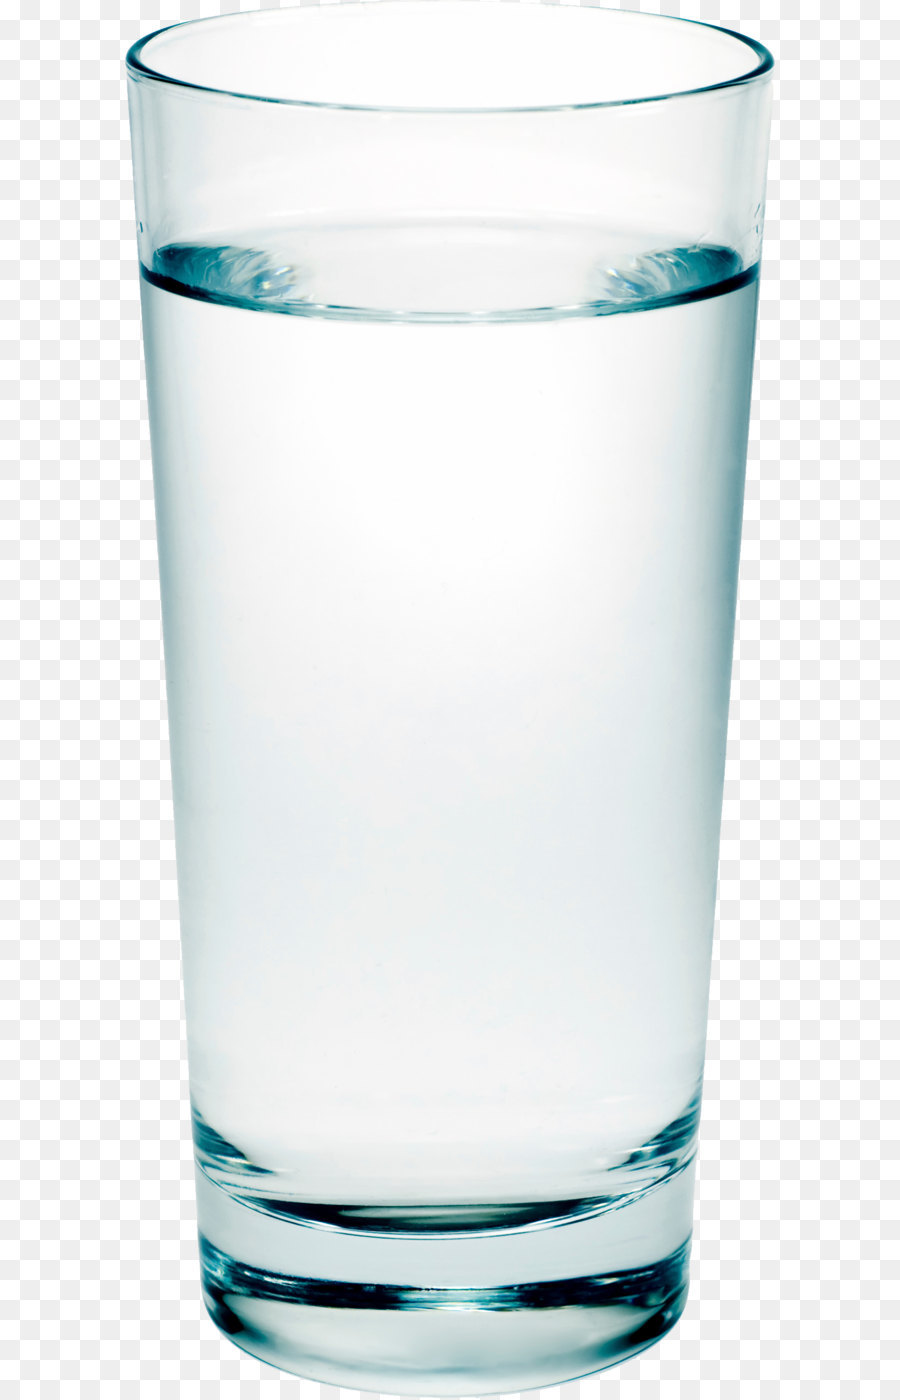 Blue transparent water glass without matting png download - 1192*2565 - Free Transparent Water png Download.